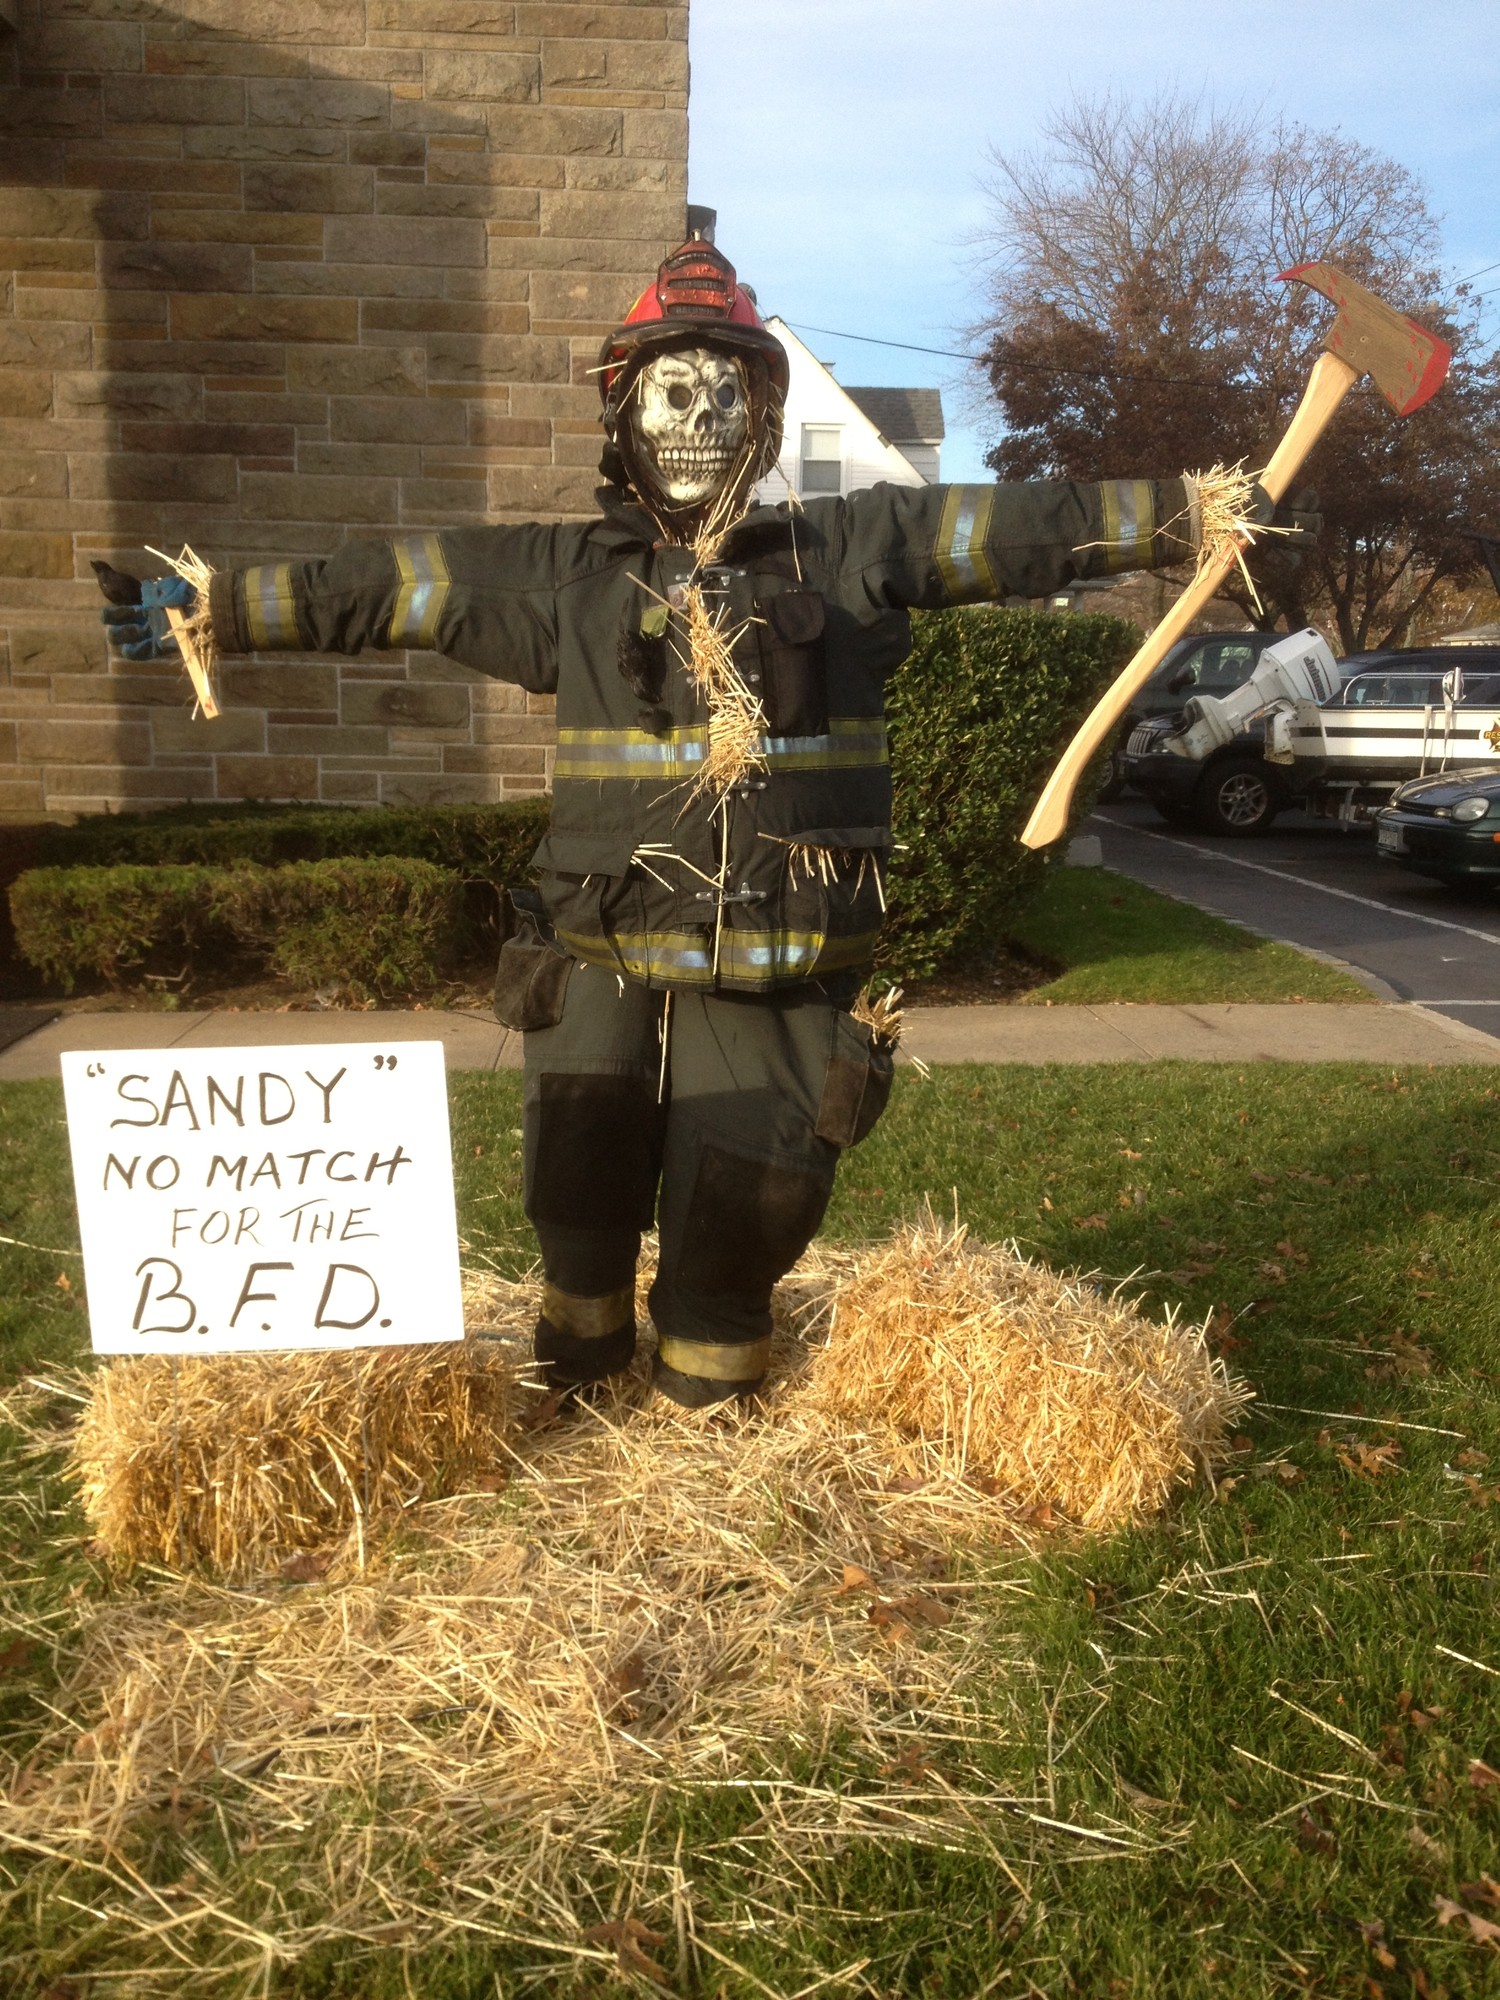 The Baldwin Civic Association
announced the second annual scarecrow contest last week. Baldwin